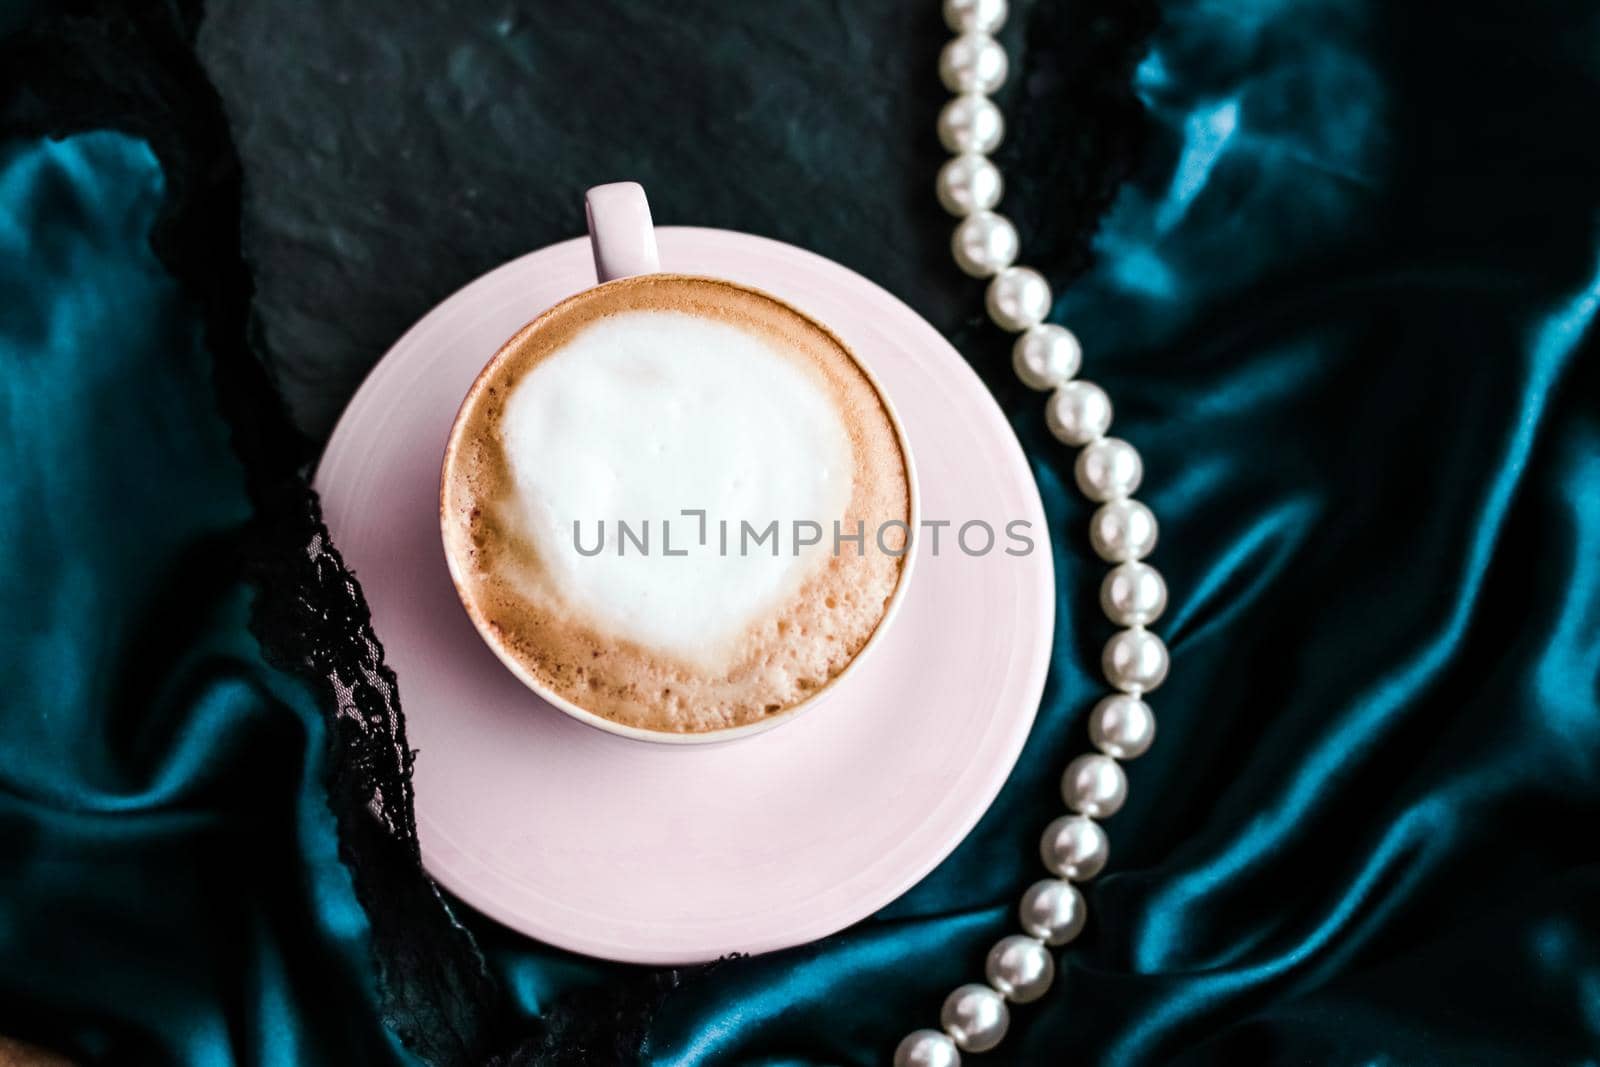 Menu, branding and recipe concept - Cup of cappuccino for breakfast with satin and pearls jewellery background, organic coffee with lactose free milk in parisian cafe for luxury vintage holiday brand